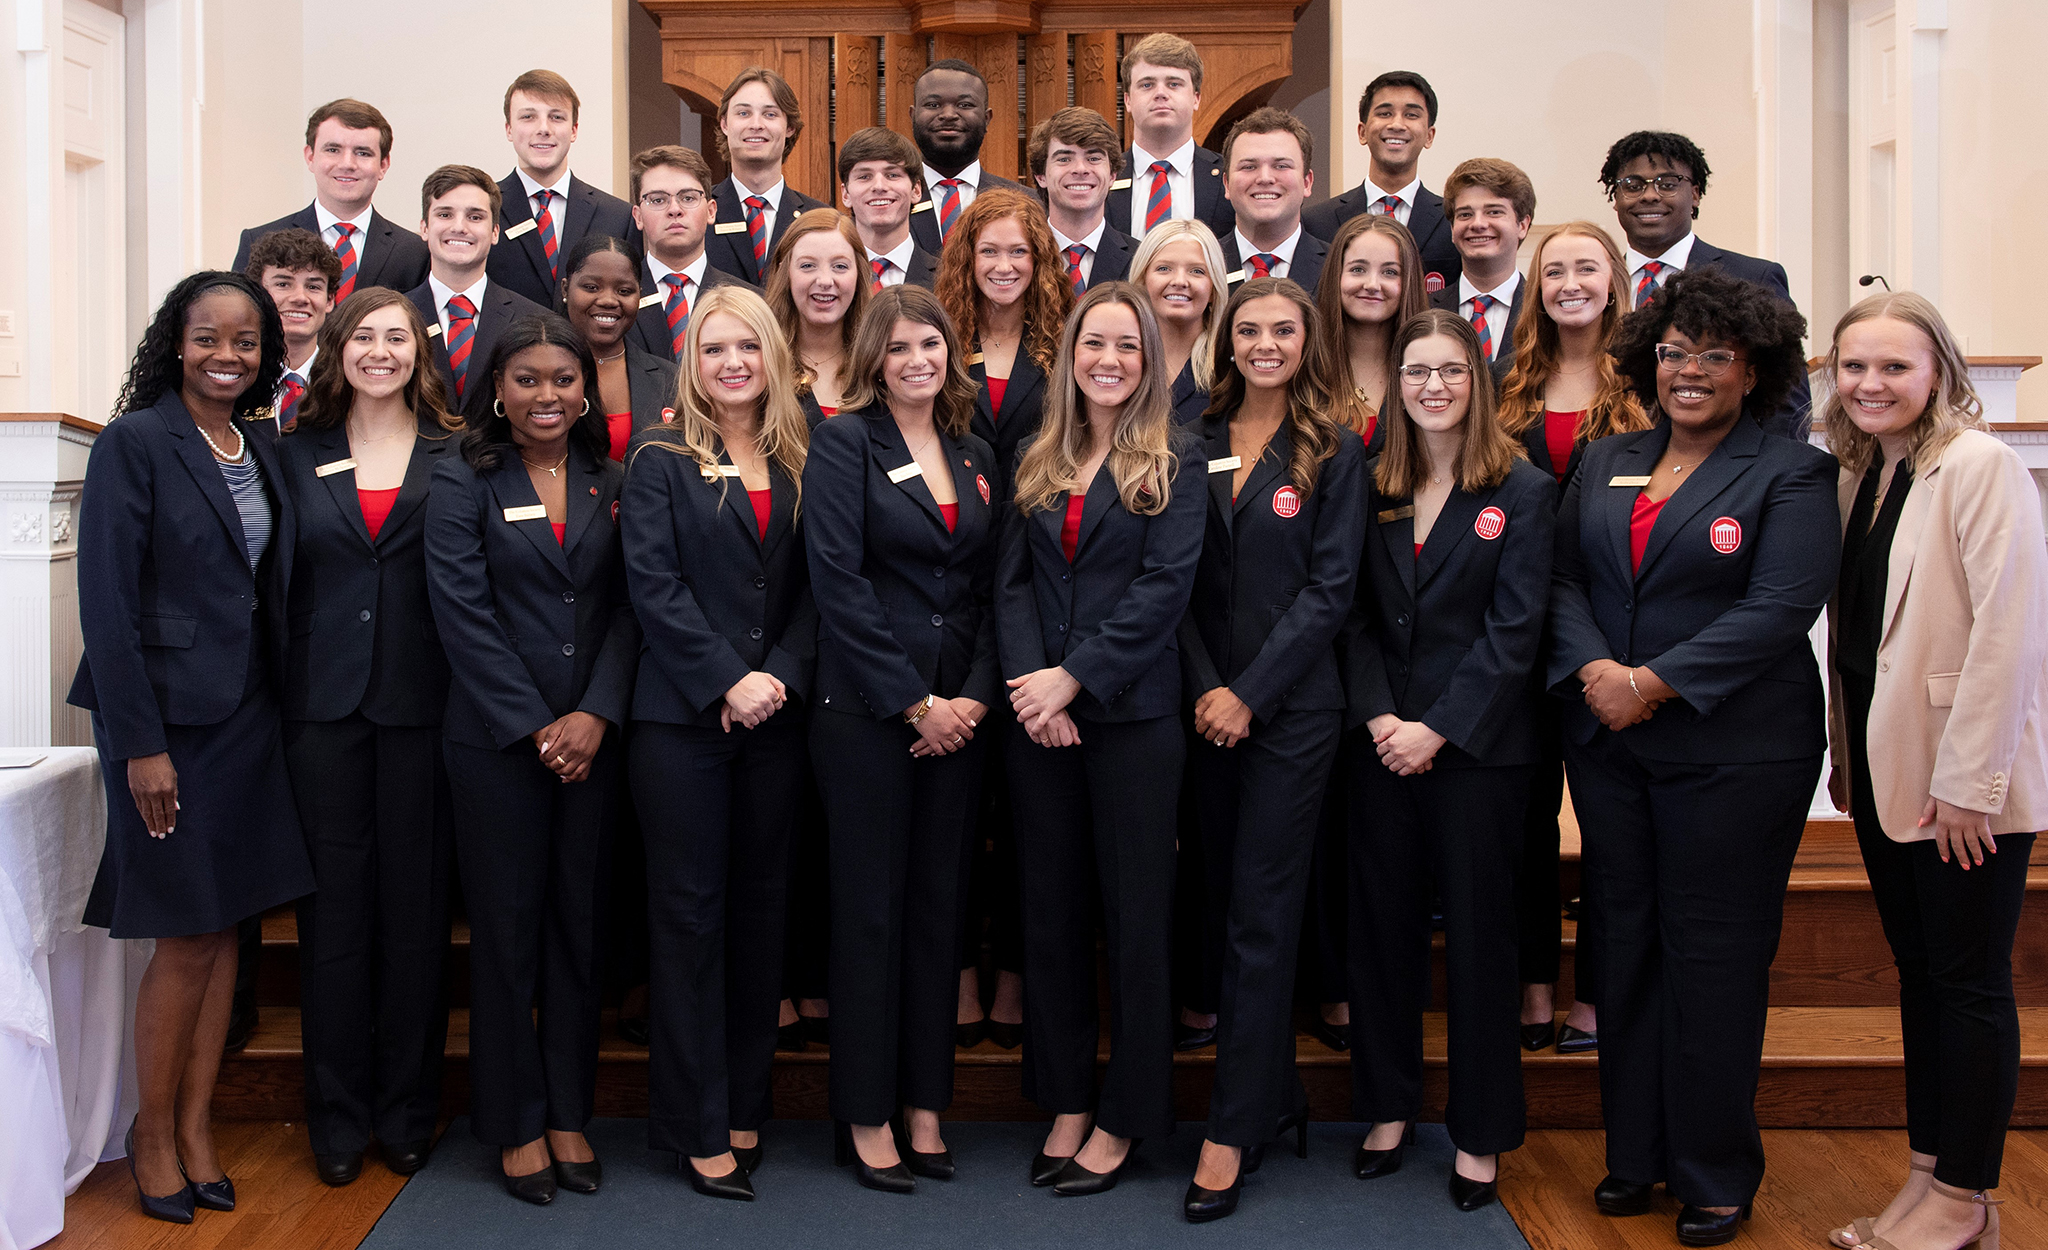 The 2022-23 class of the Columns Society has been named to honor James Meredith, who integrated the university when he enrolled 60 years ago. Columns Society members serve as the official hosts and hostesses for the university at a variety of public events. Submitted photo